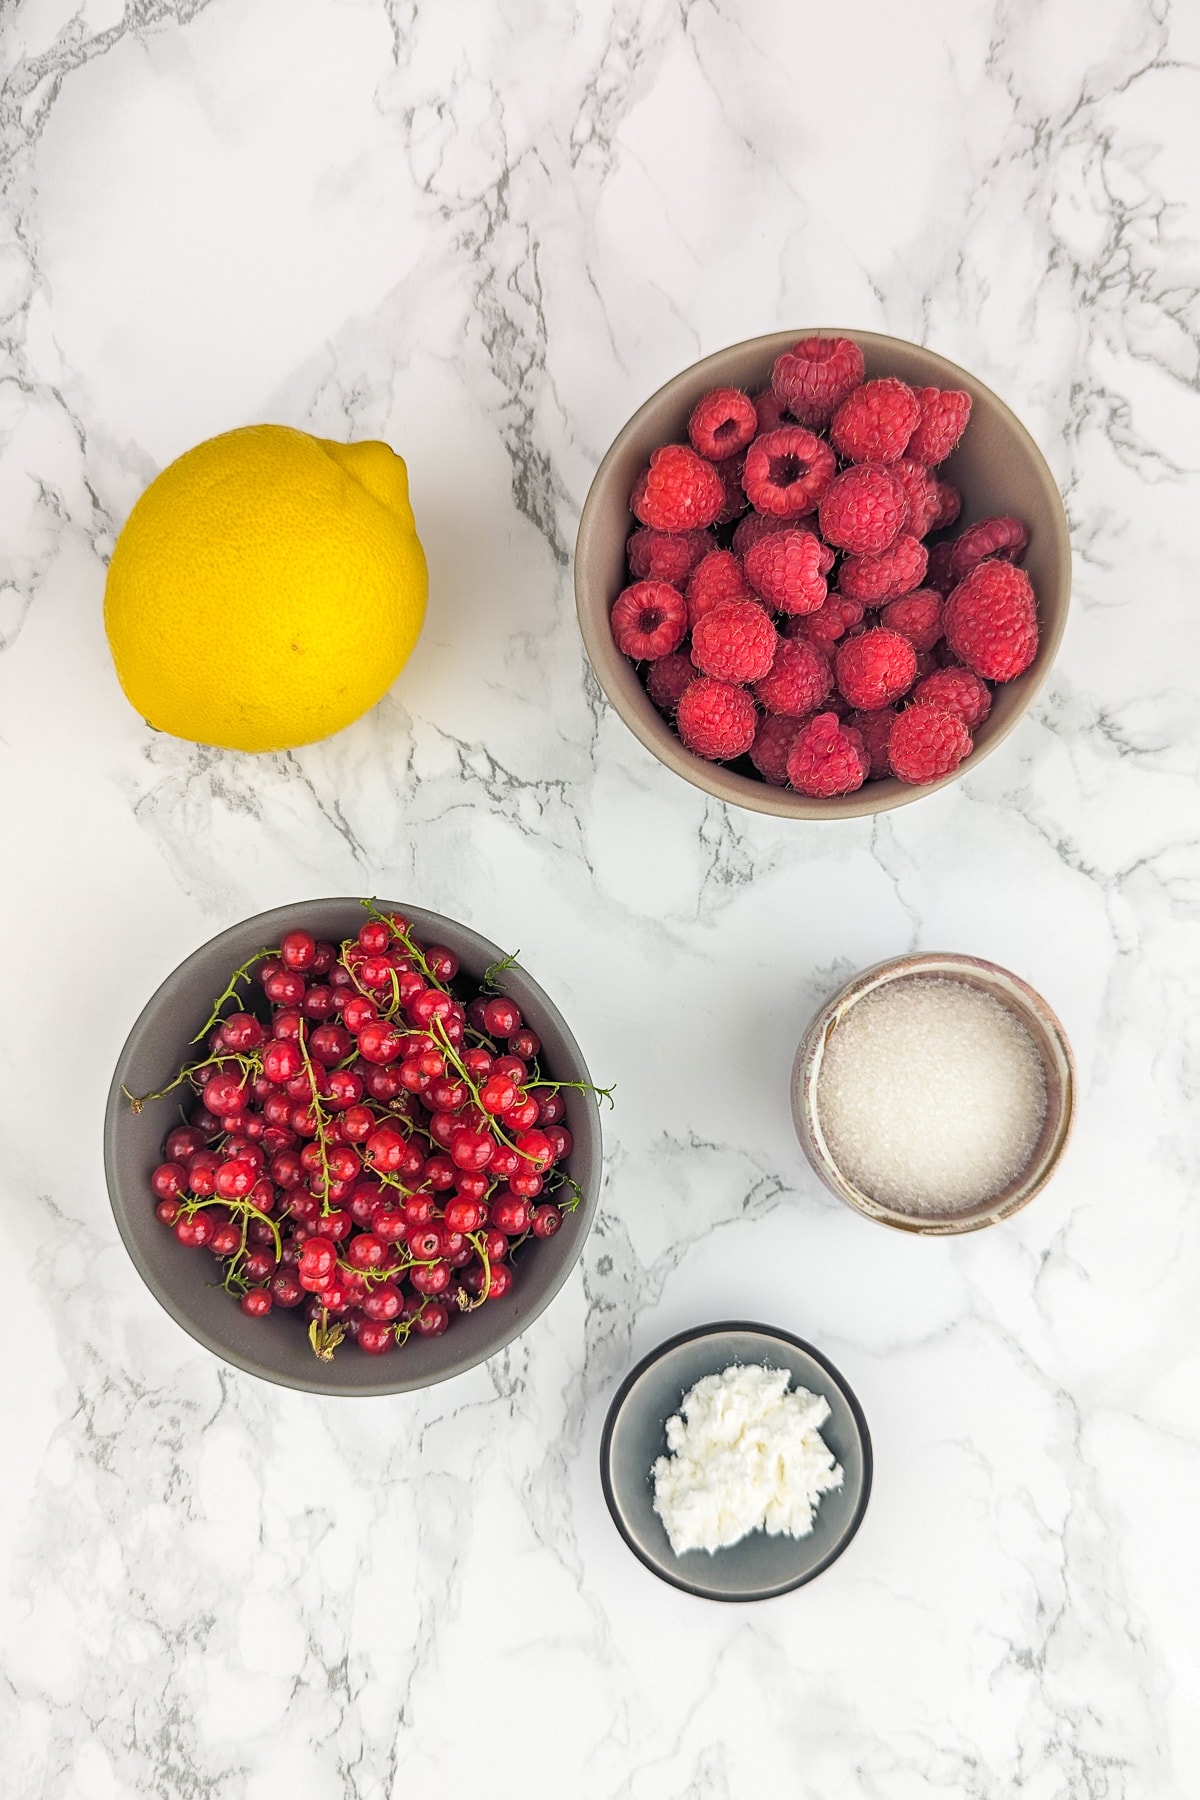 Raspberries, Red currants, sugar, lemon and starch on a white marble table.